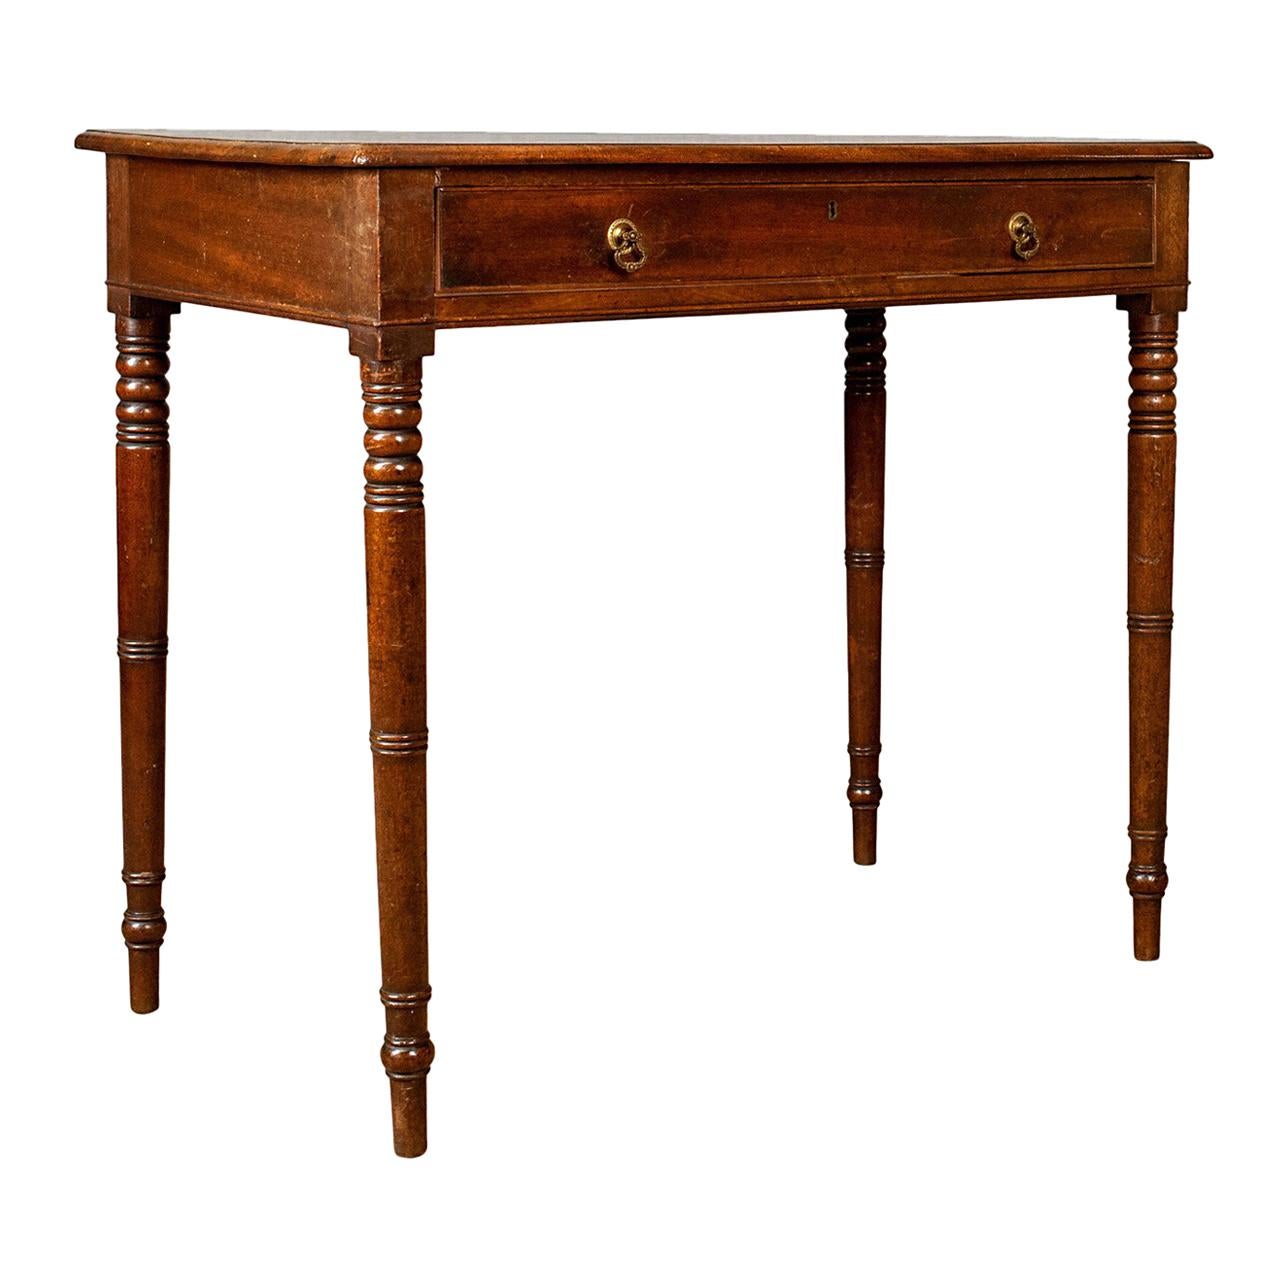 Antique Side Table, English, Georgian, Mahogany Bow Fronted Console Table